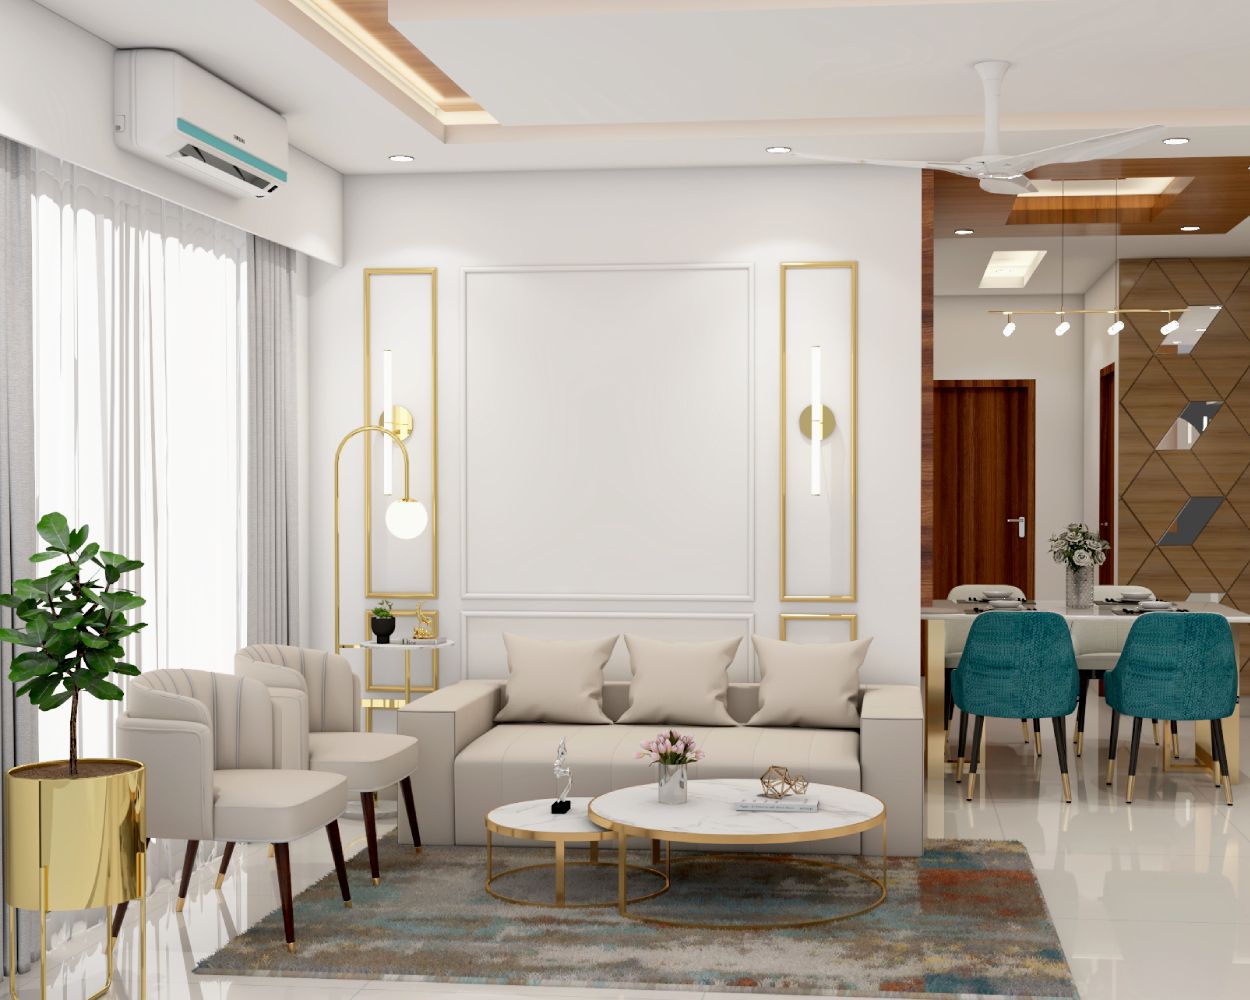 Contemporary Living Room Design With White And Gold Wall Trims